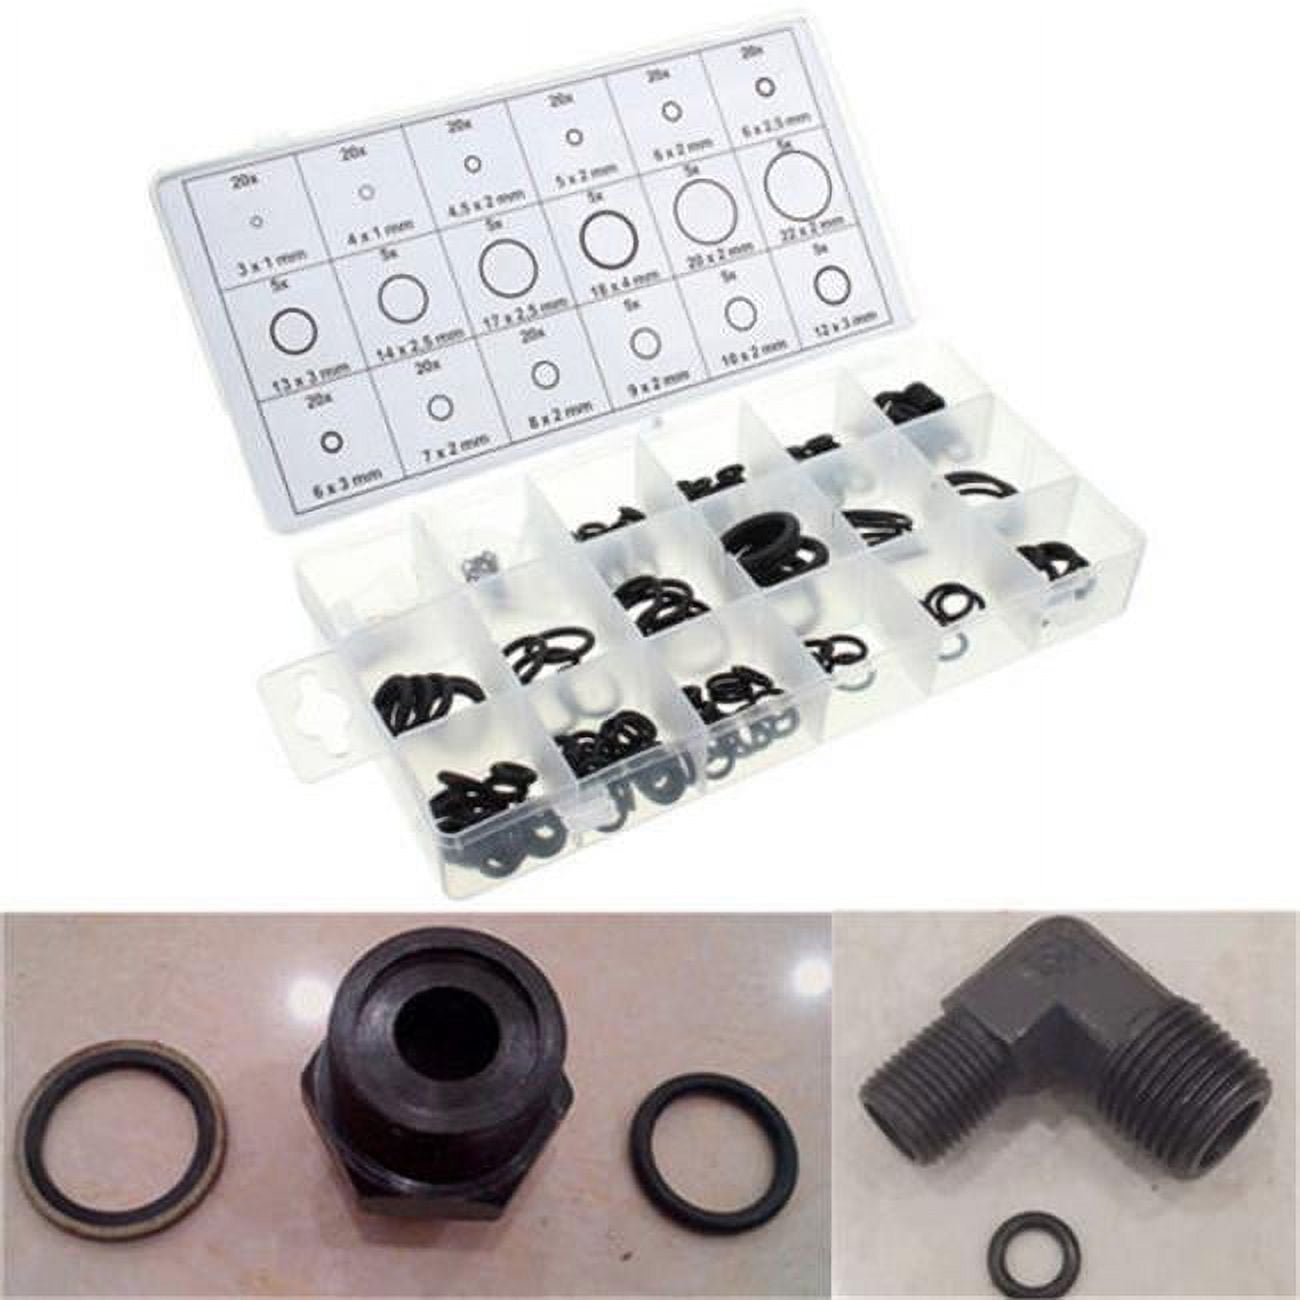 Or225 O-rings Assortment - 225 Pieces